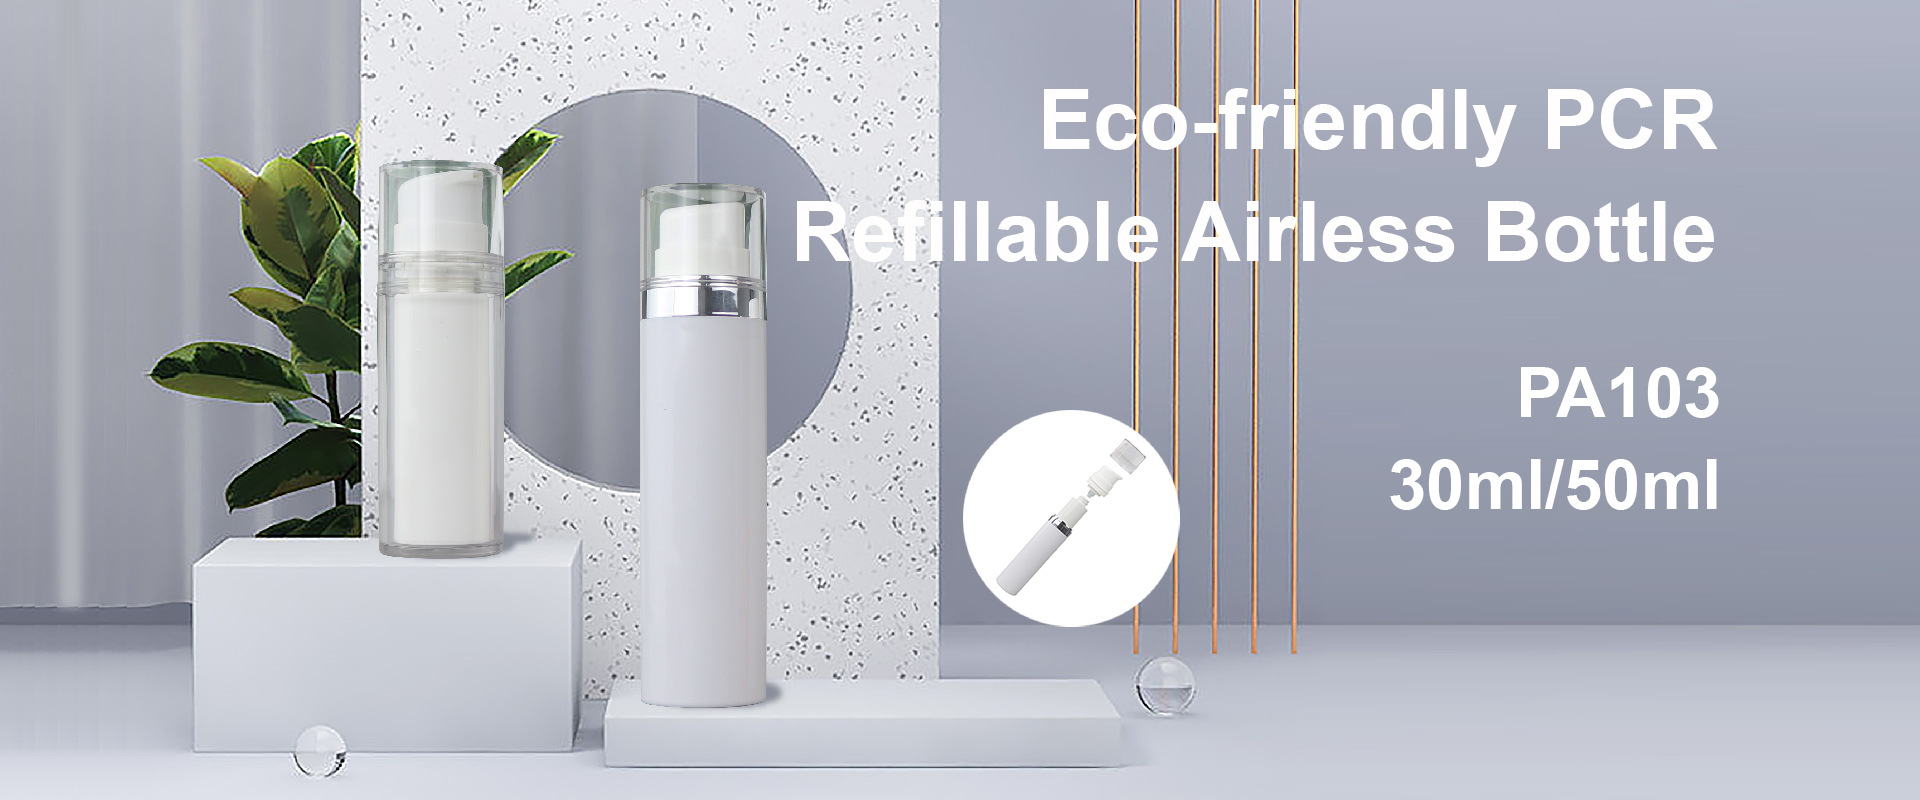 eco-friendly airless bottle